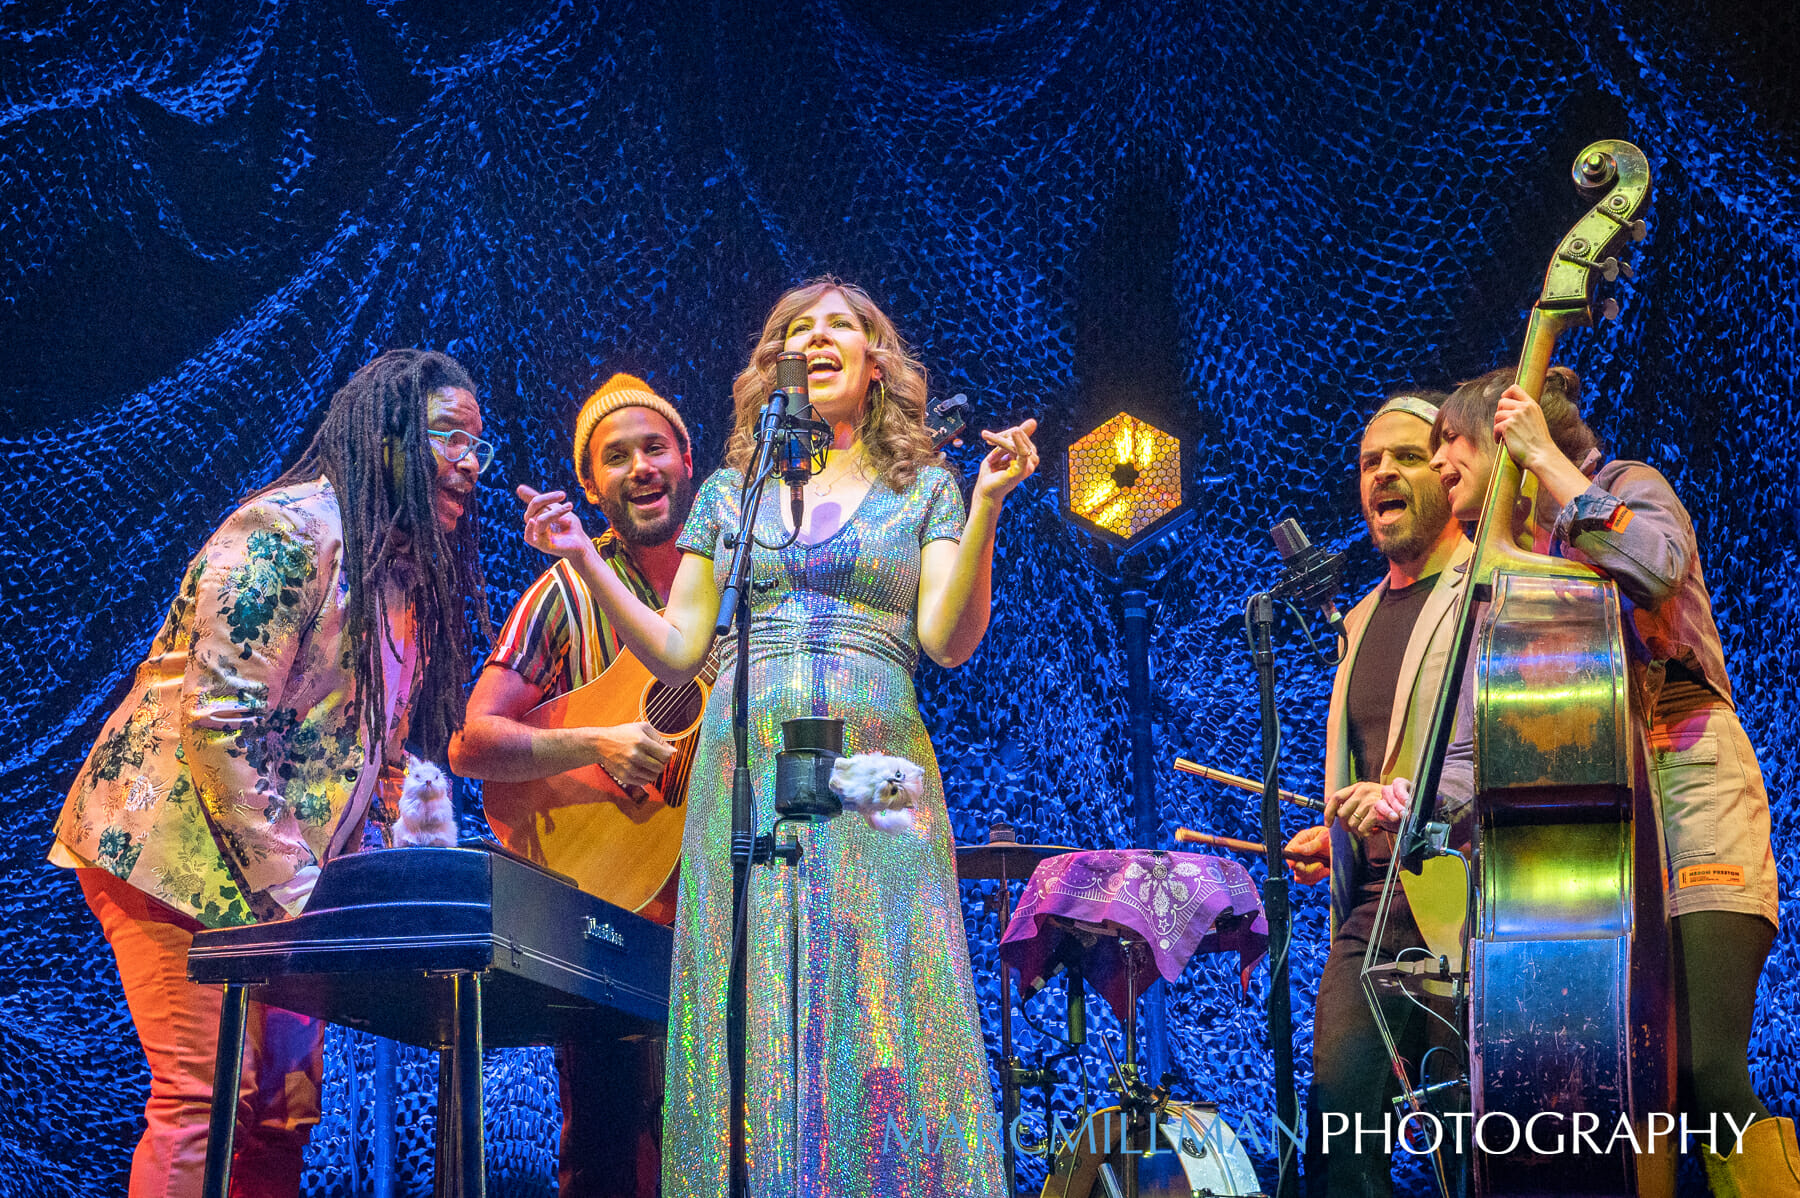 Lake Street Dive Deliver Glowing Performance at The Capitol Theatre (A Gallery)